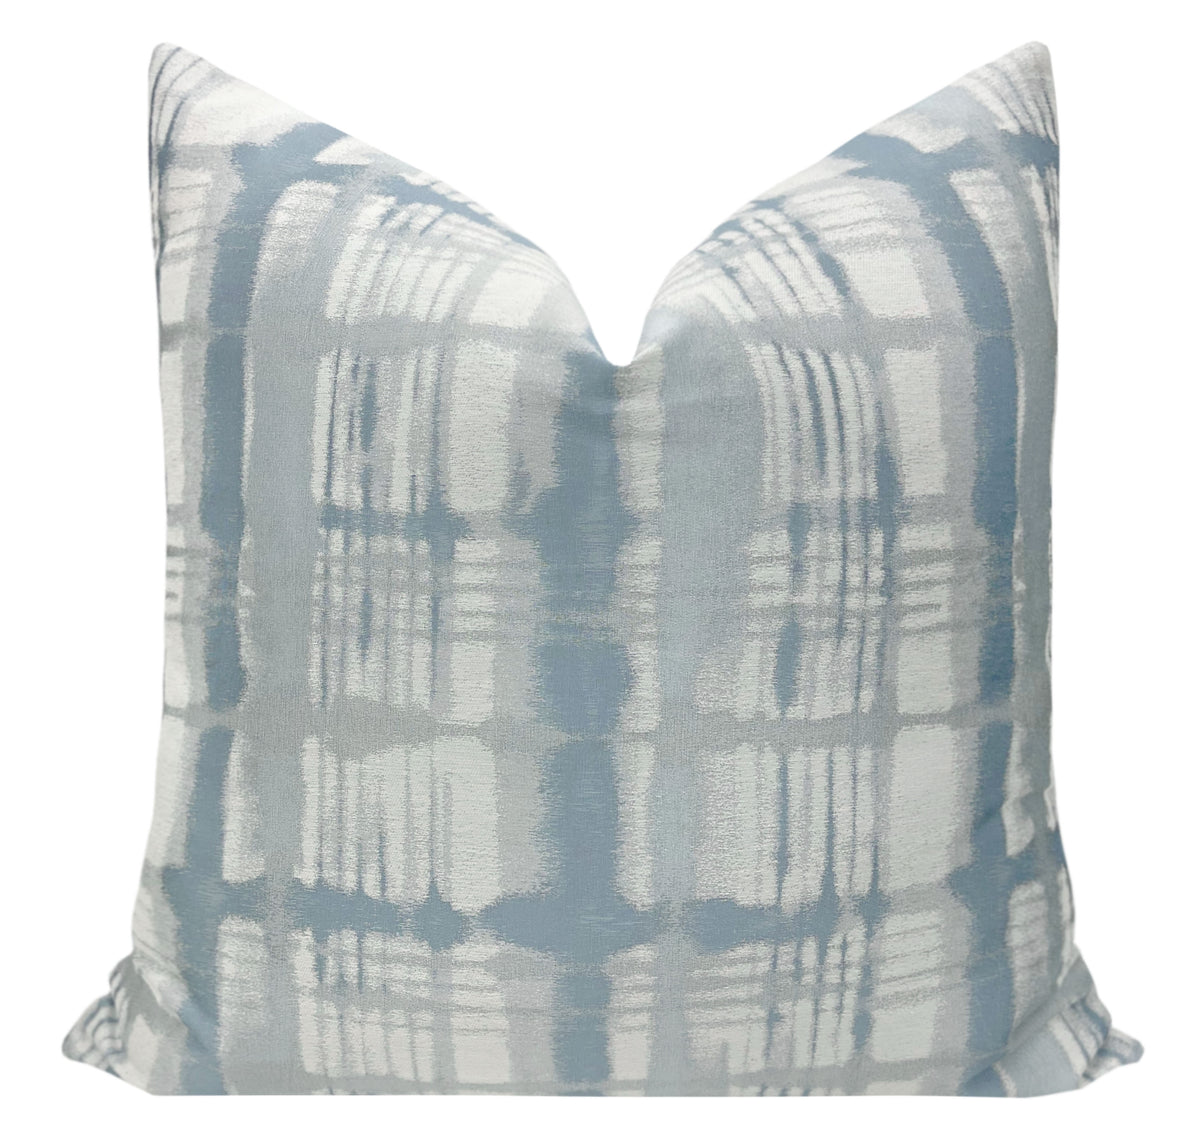 FINAL SALE :: 22" X 22" ABSTRACT PLAID // POWDER BLUE PILLOW COVER